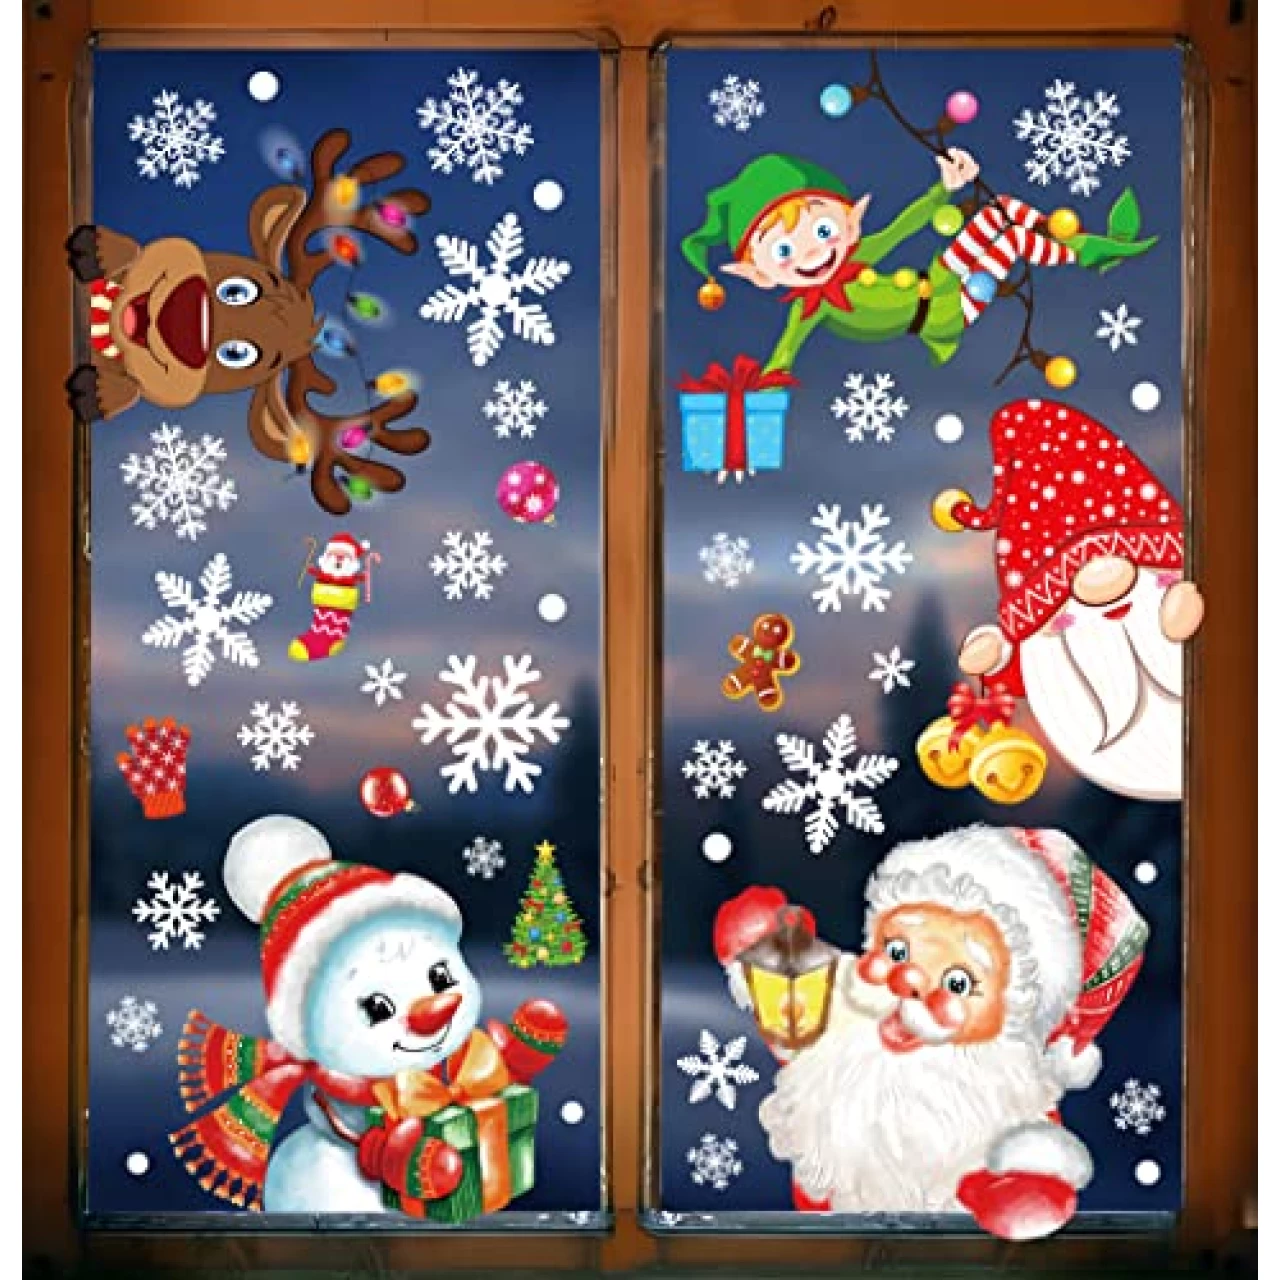 350PCS Christmas Decorations Snowflakes Window Clings Vintage Xmas Winter Decals Santa Clause Gnome Elf Snowman Reindeer Party Cling Decor